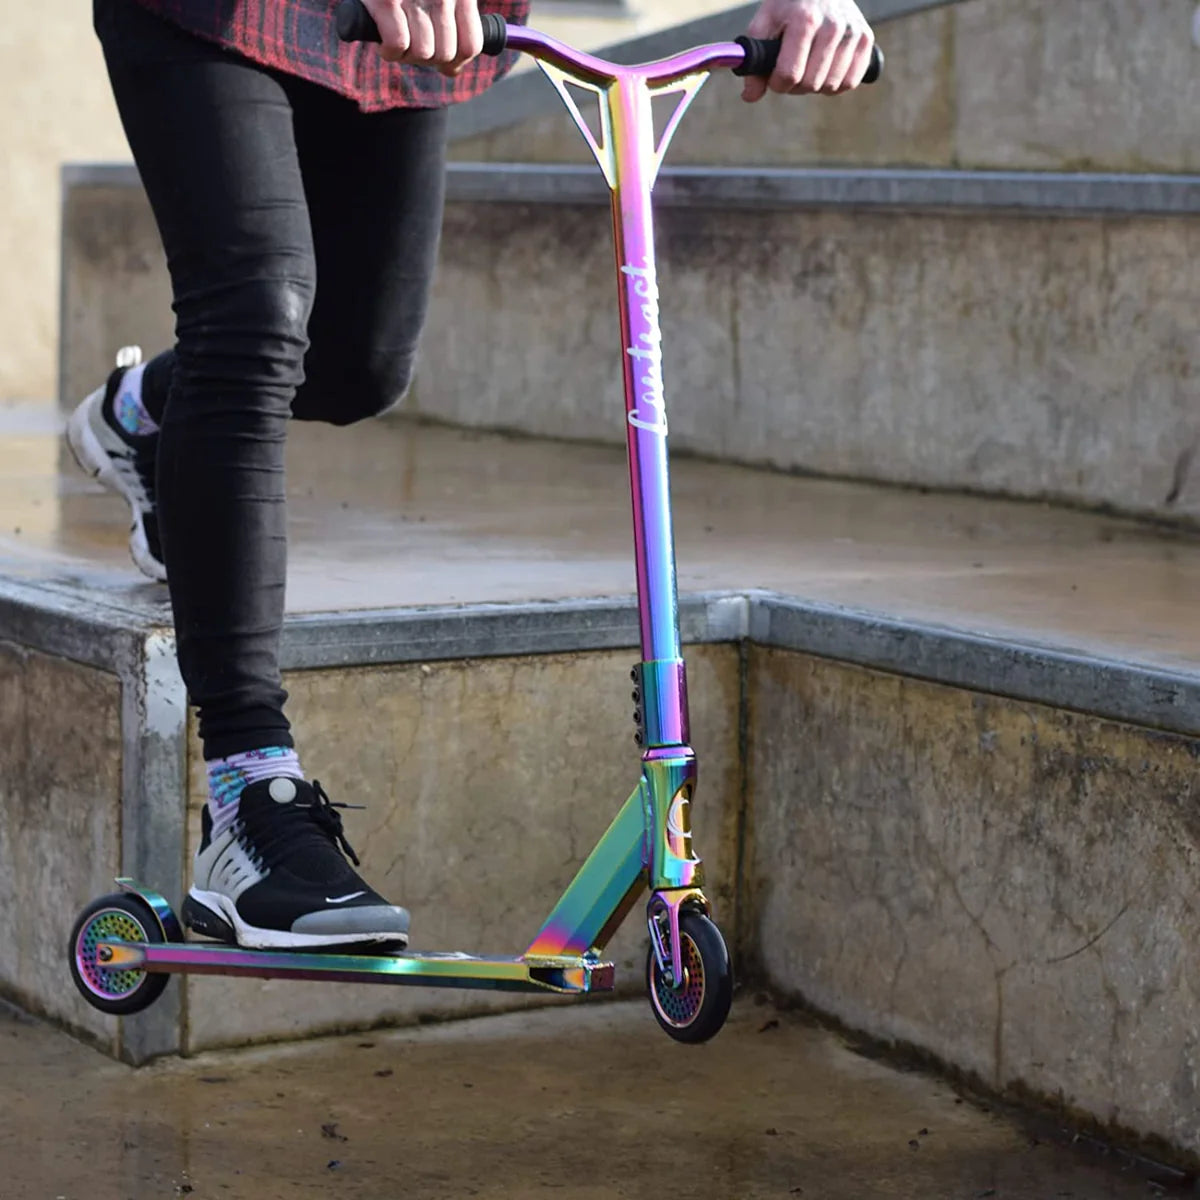 Contrast Pro Ride Stunt Scooter - Neon Green/Blue